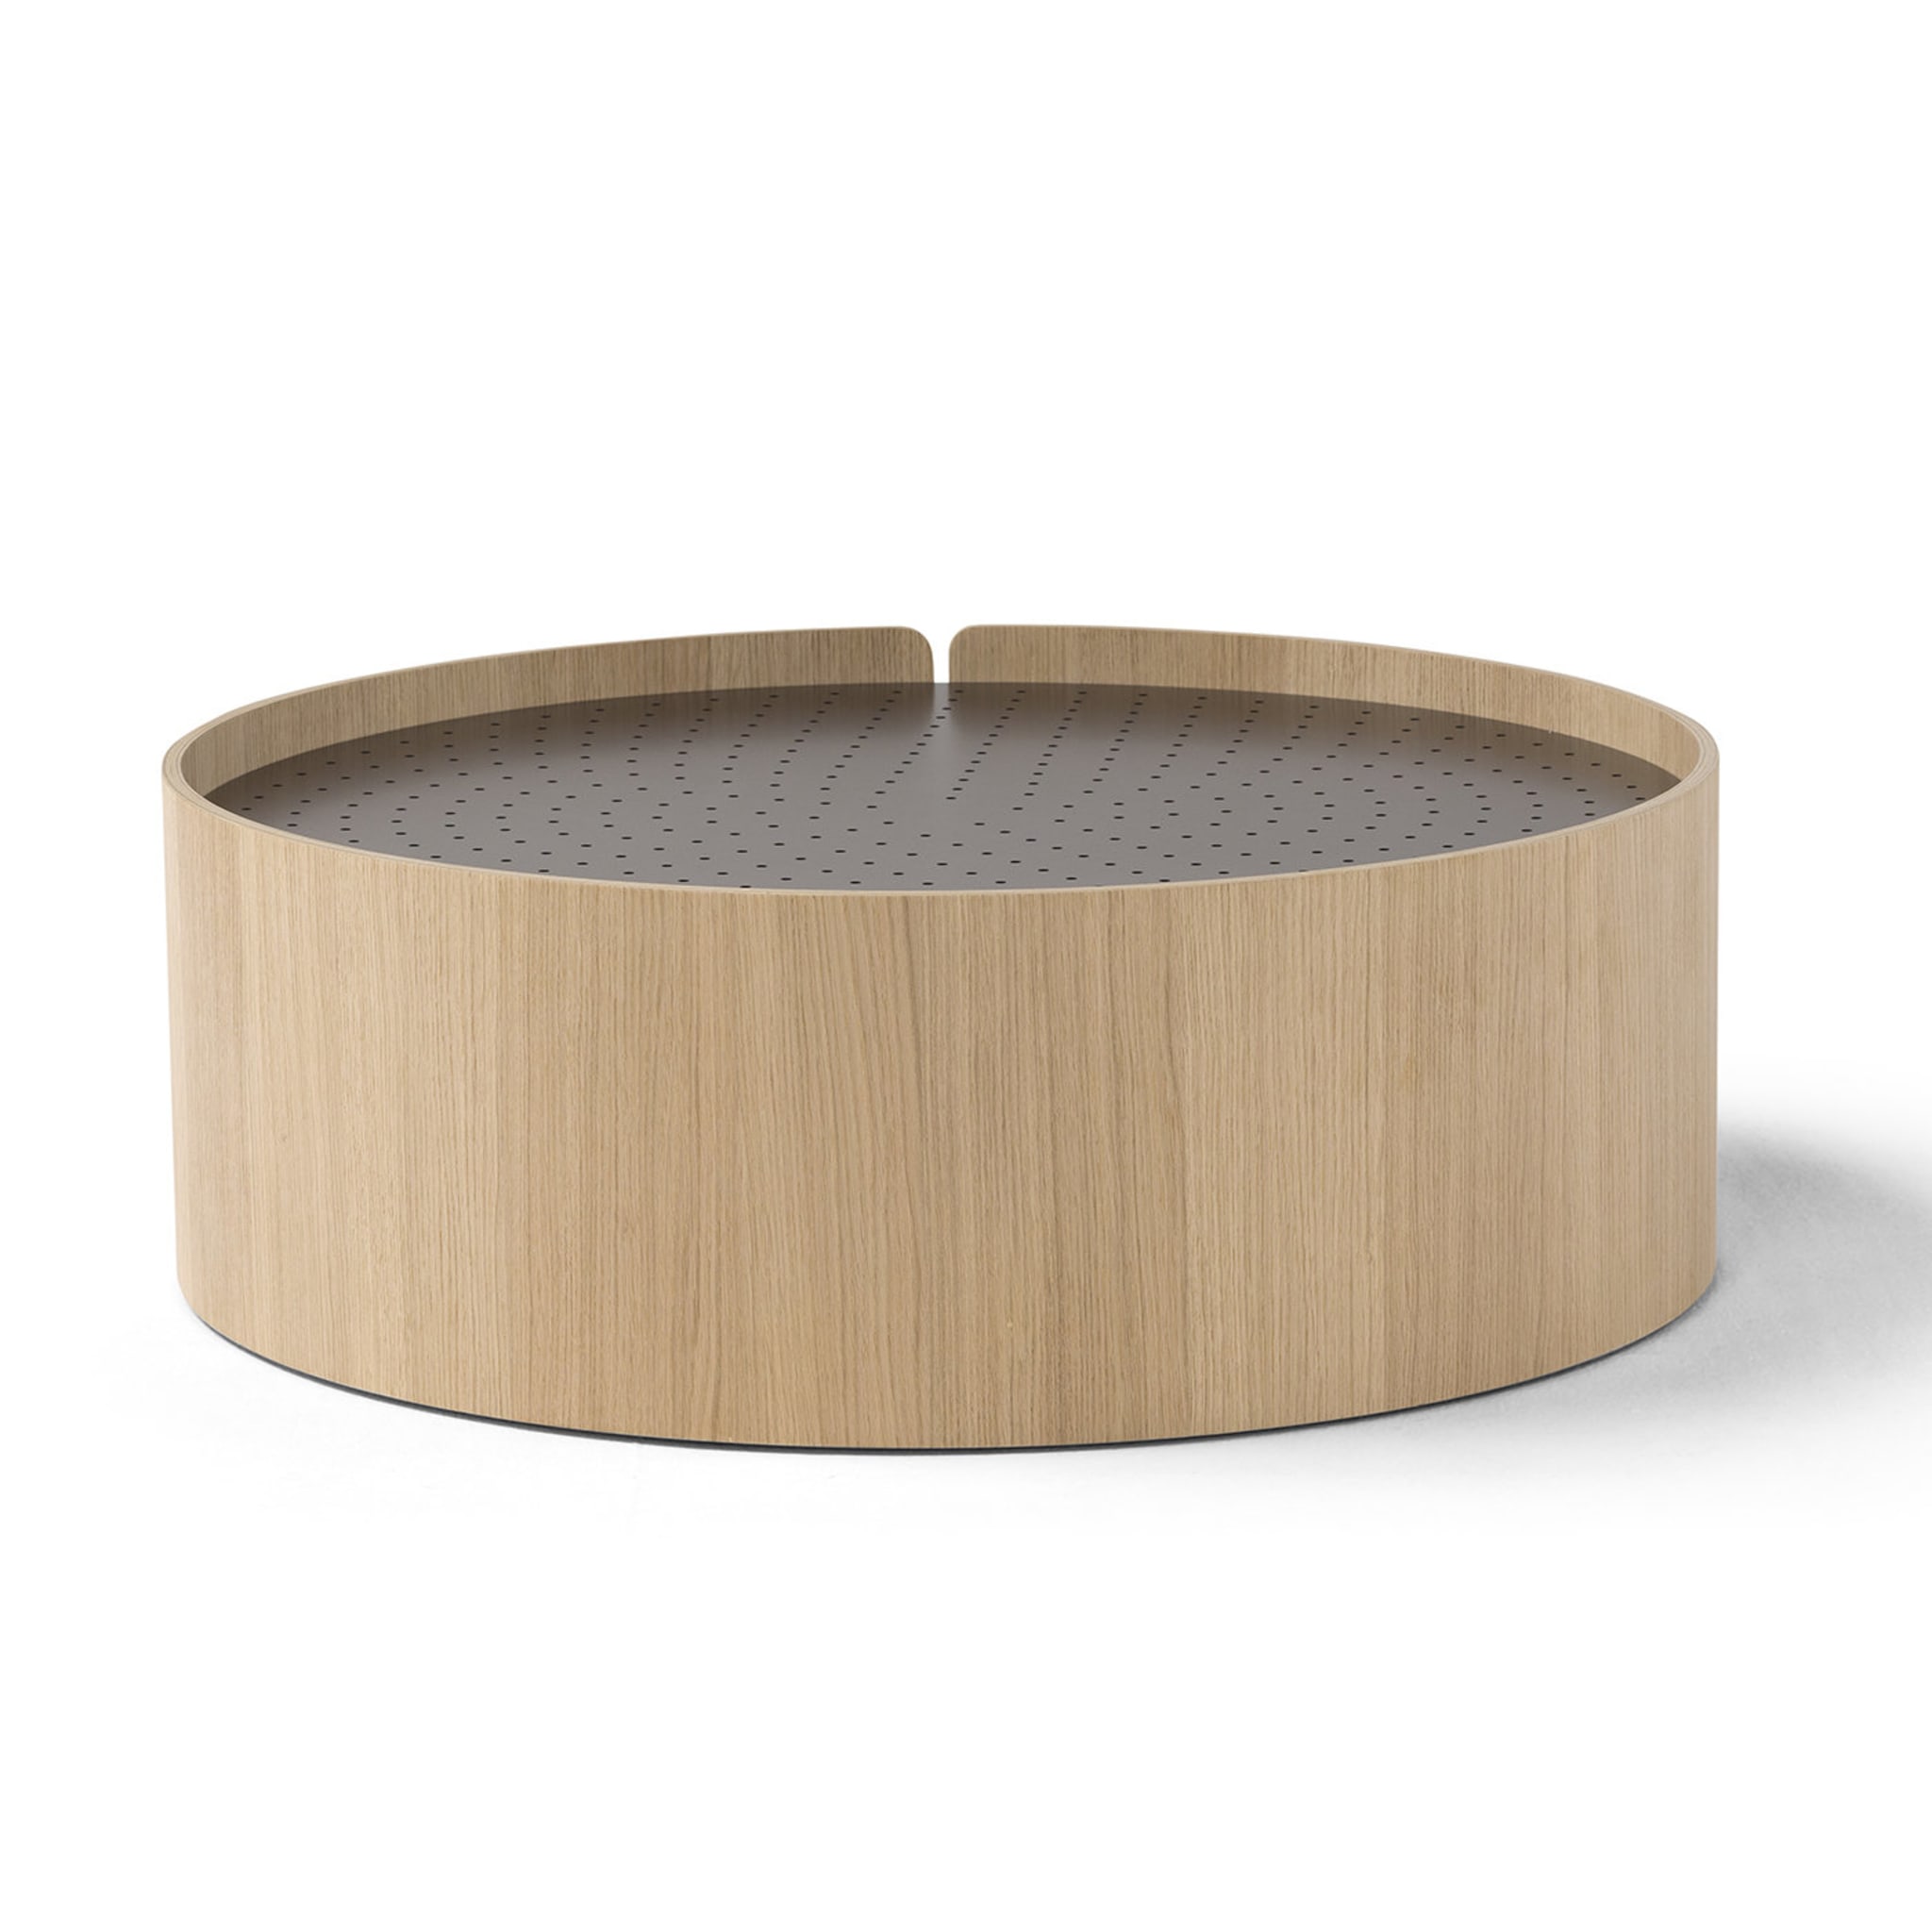 Setacci Coffee Table with Leather Top - Alternative view 3